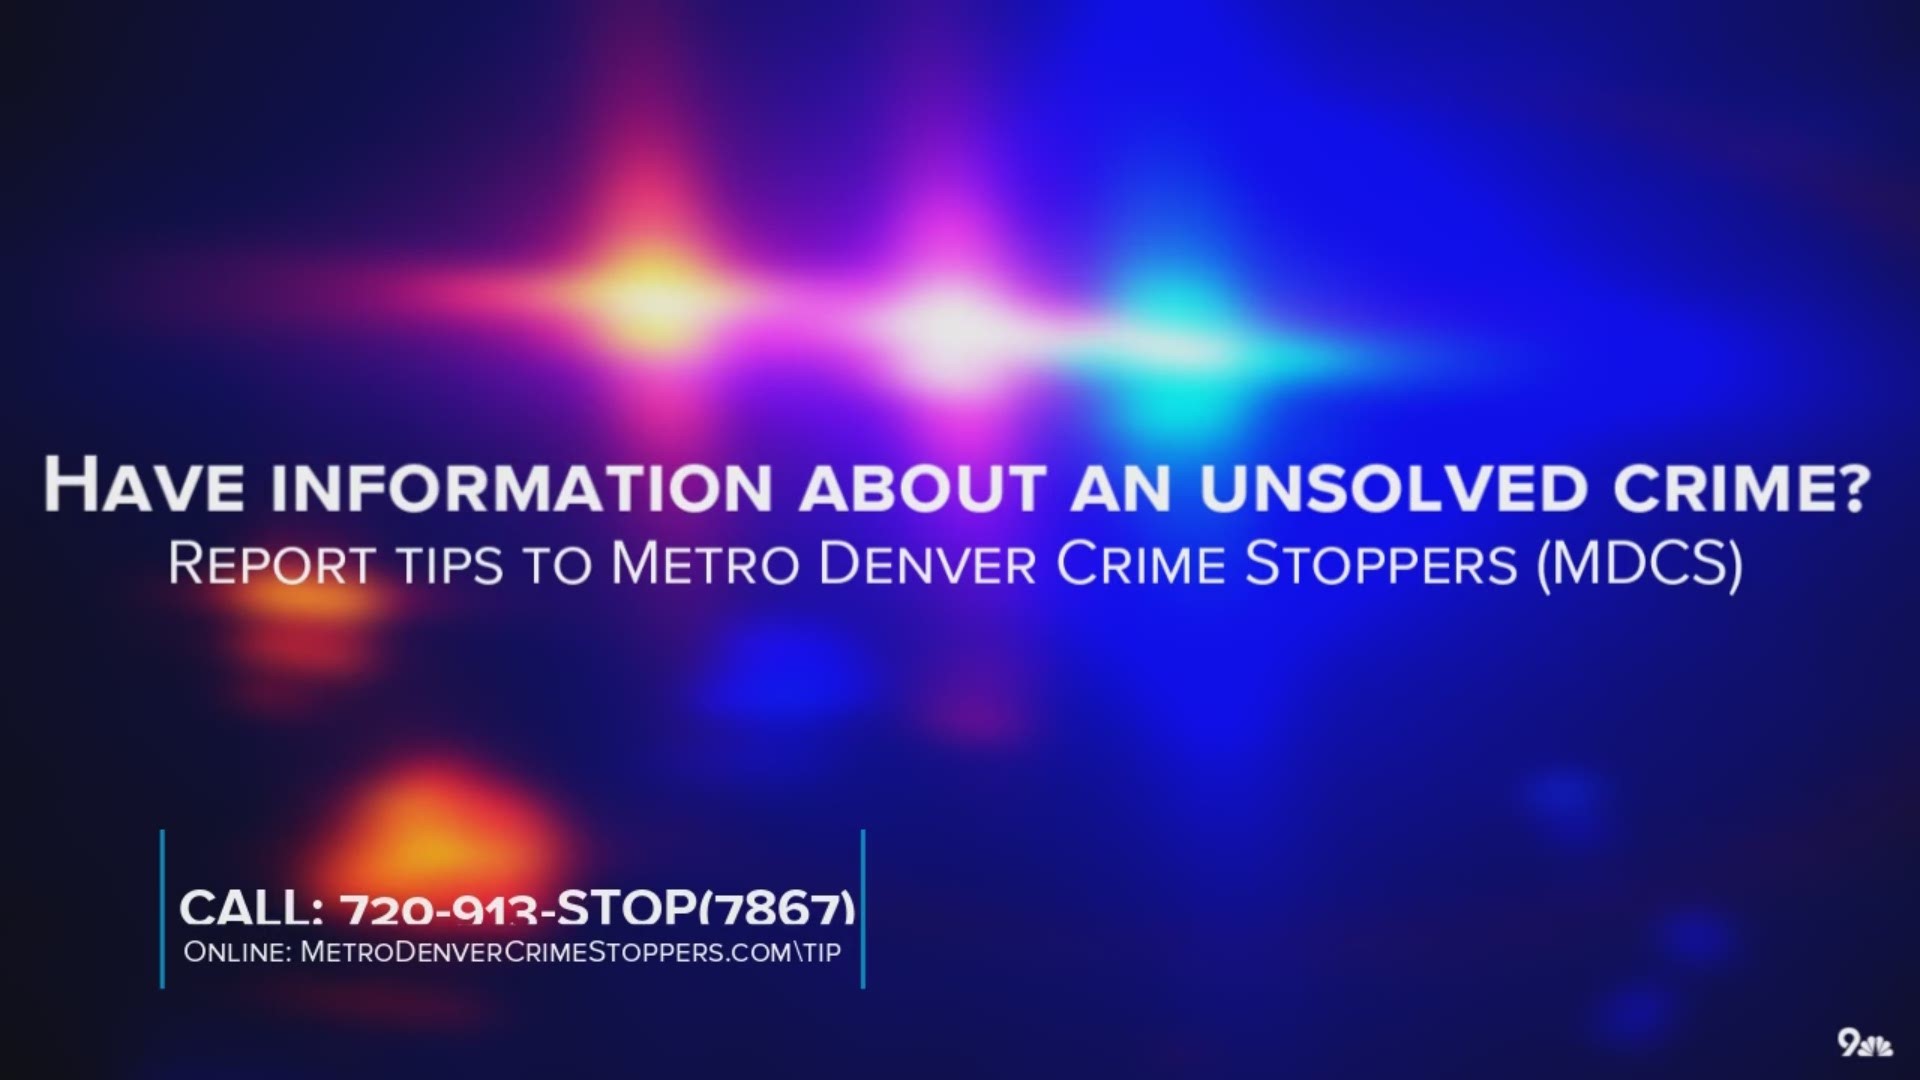 If you have information on an unsolved crime, you can stay anonymous and be eligible for a reward up to $2,000. This is how the Crime Stoppers program works.